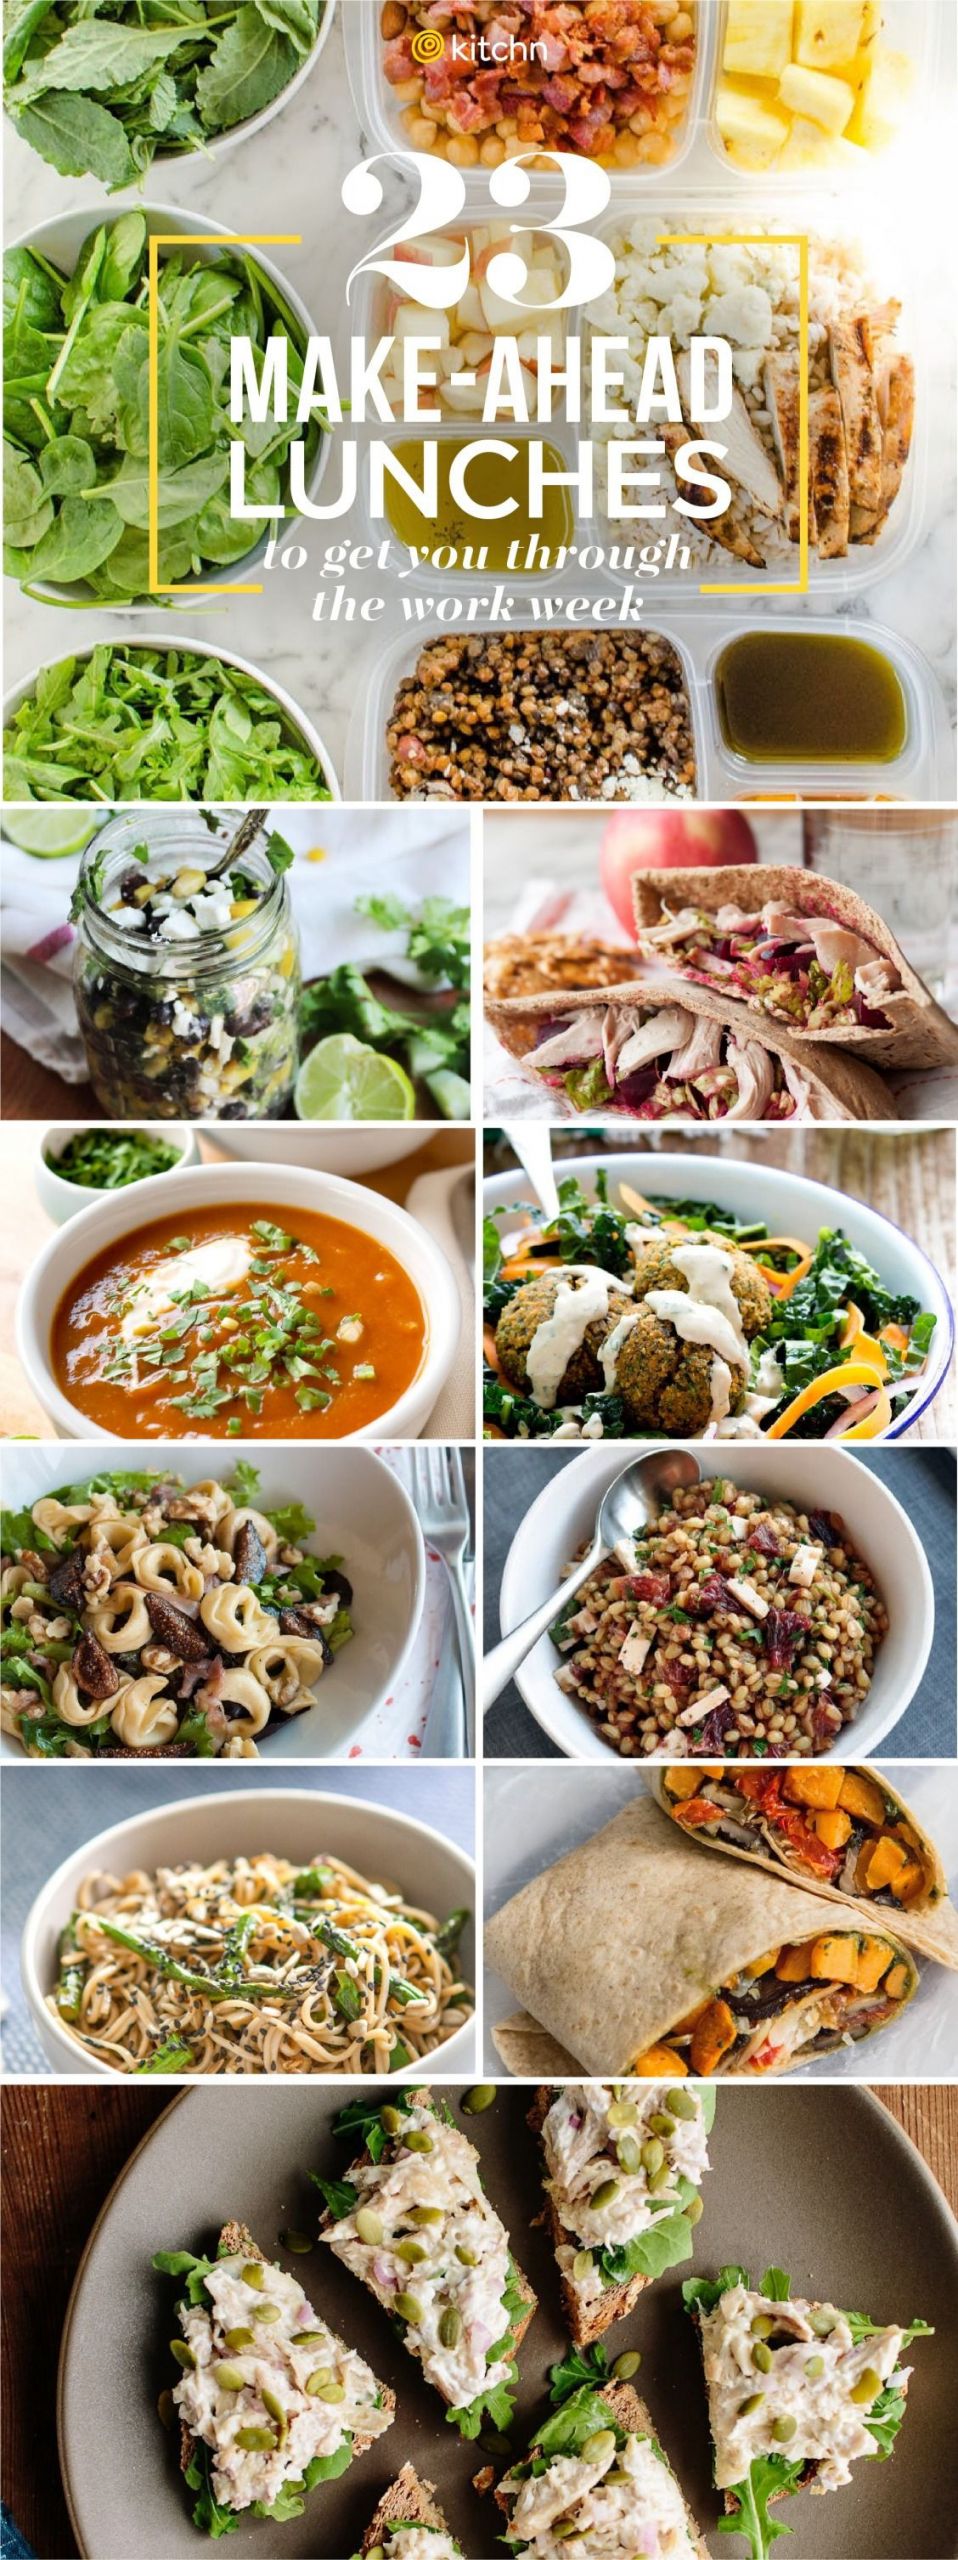 Healthy Make Ahead Lunches For Week
 20 Make Ahead Lunches to Get You Through the Work Week